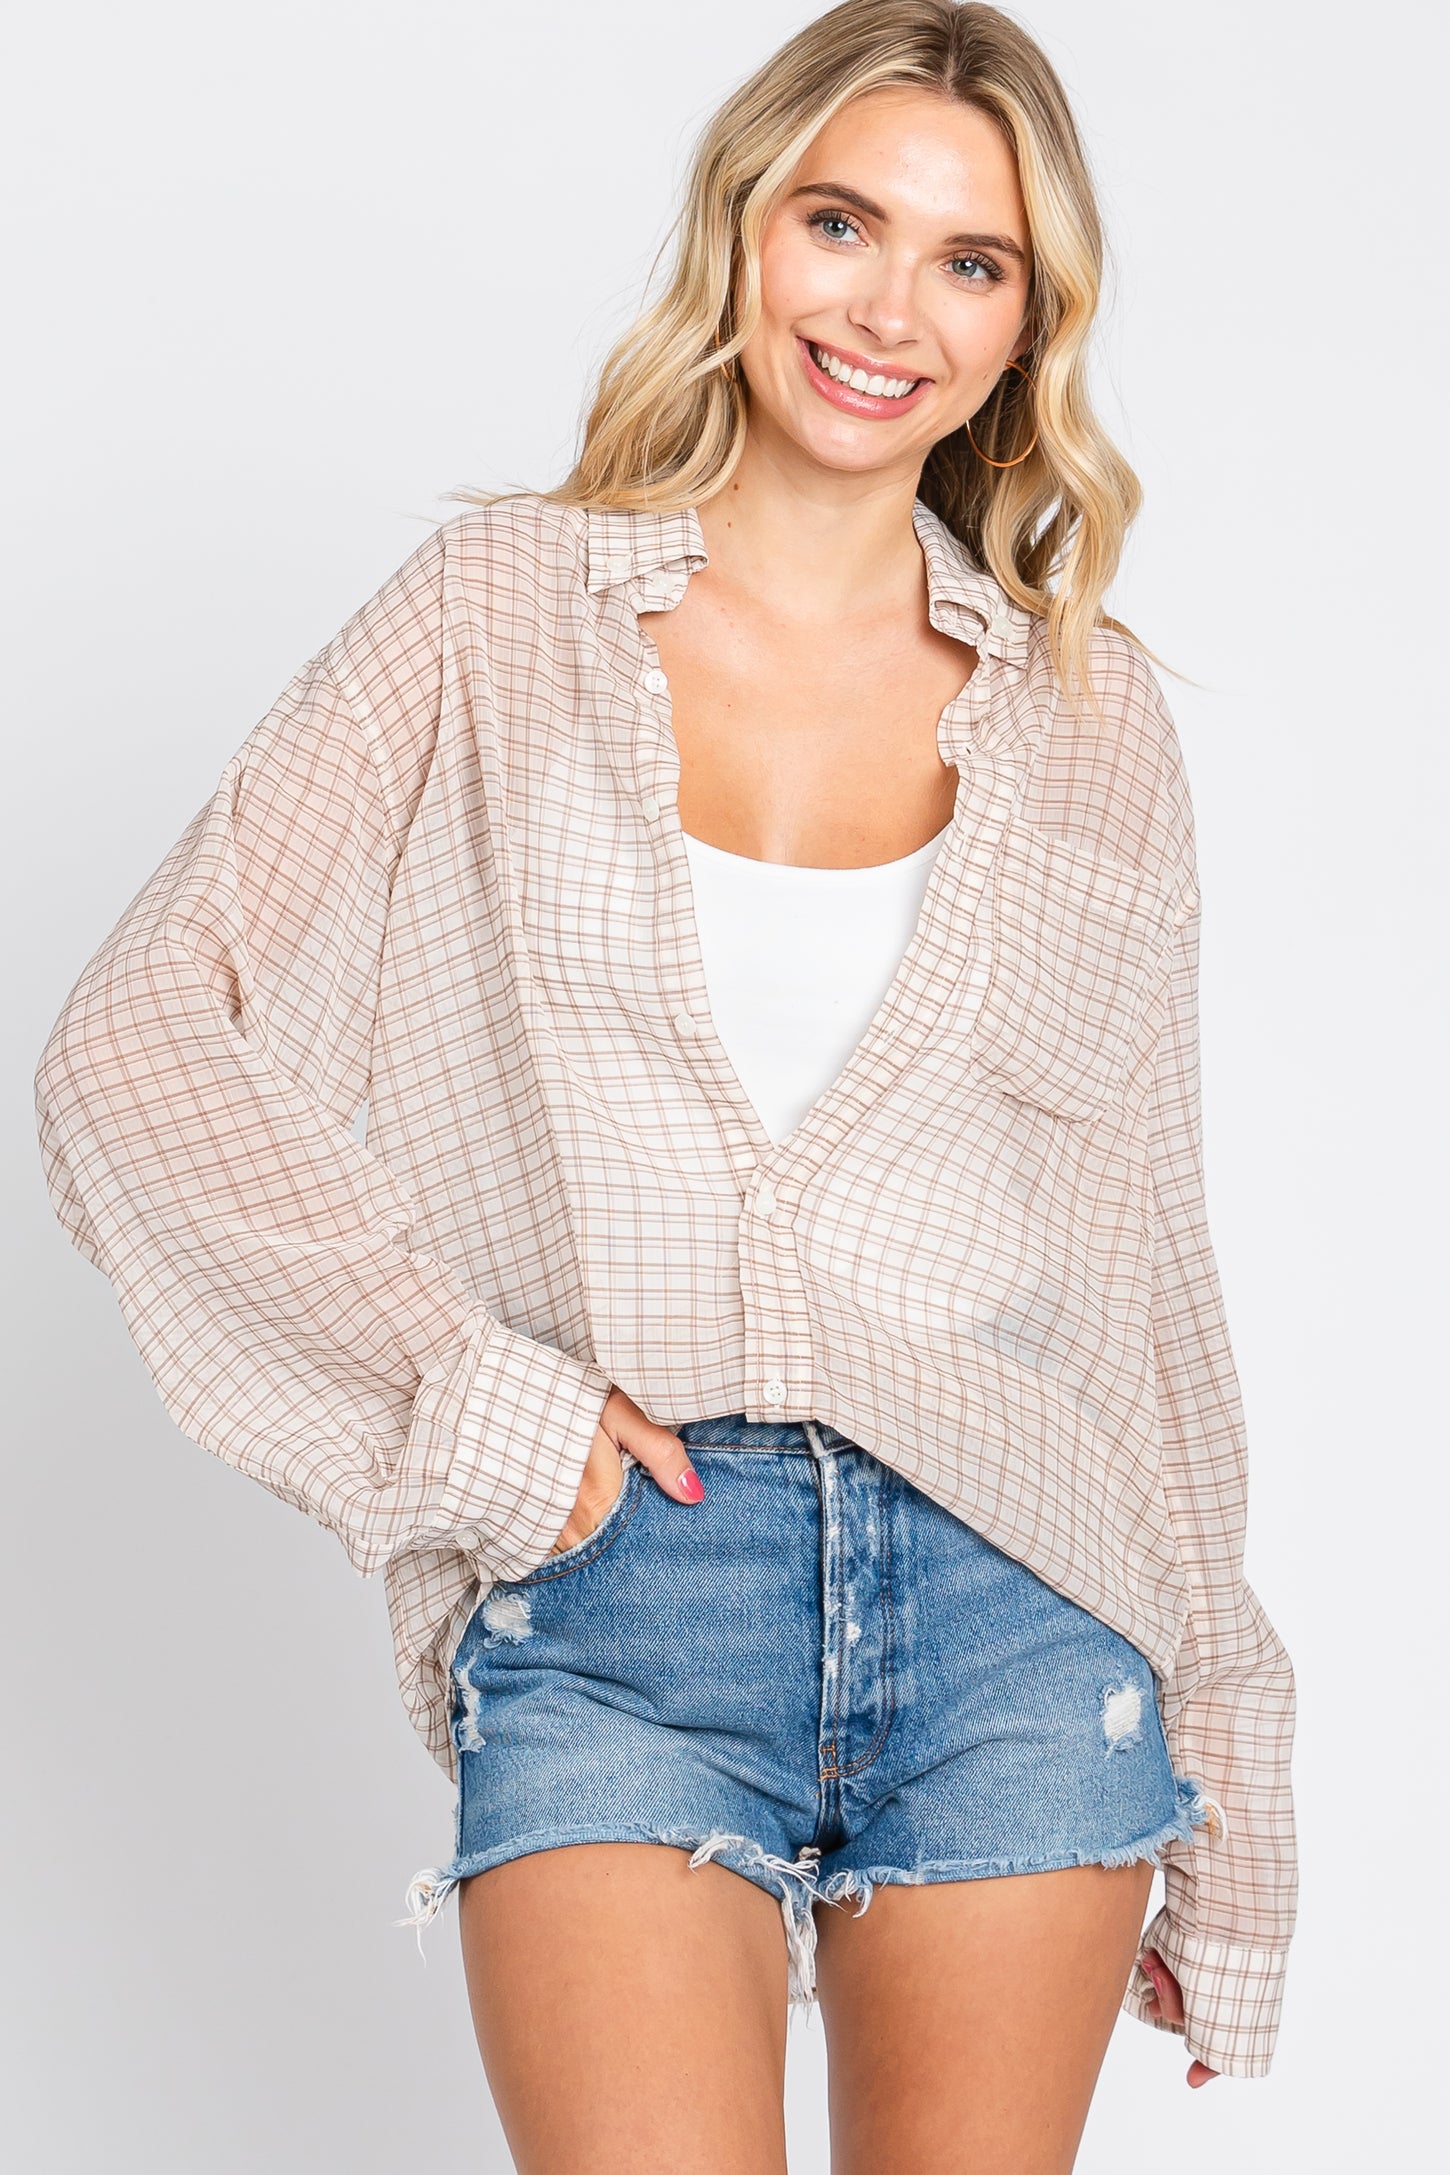 Beige Grid Print Semi Sheer Maternity Button Up Top